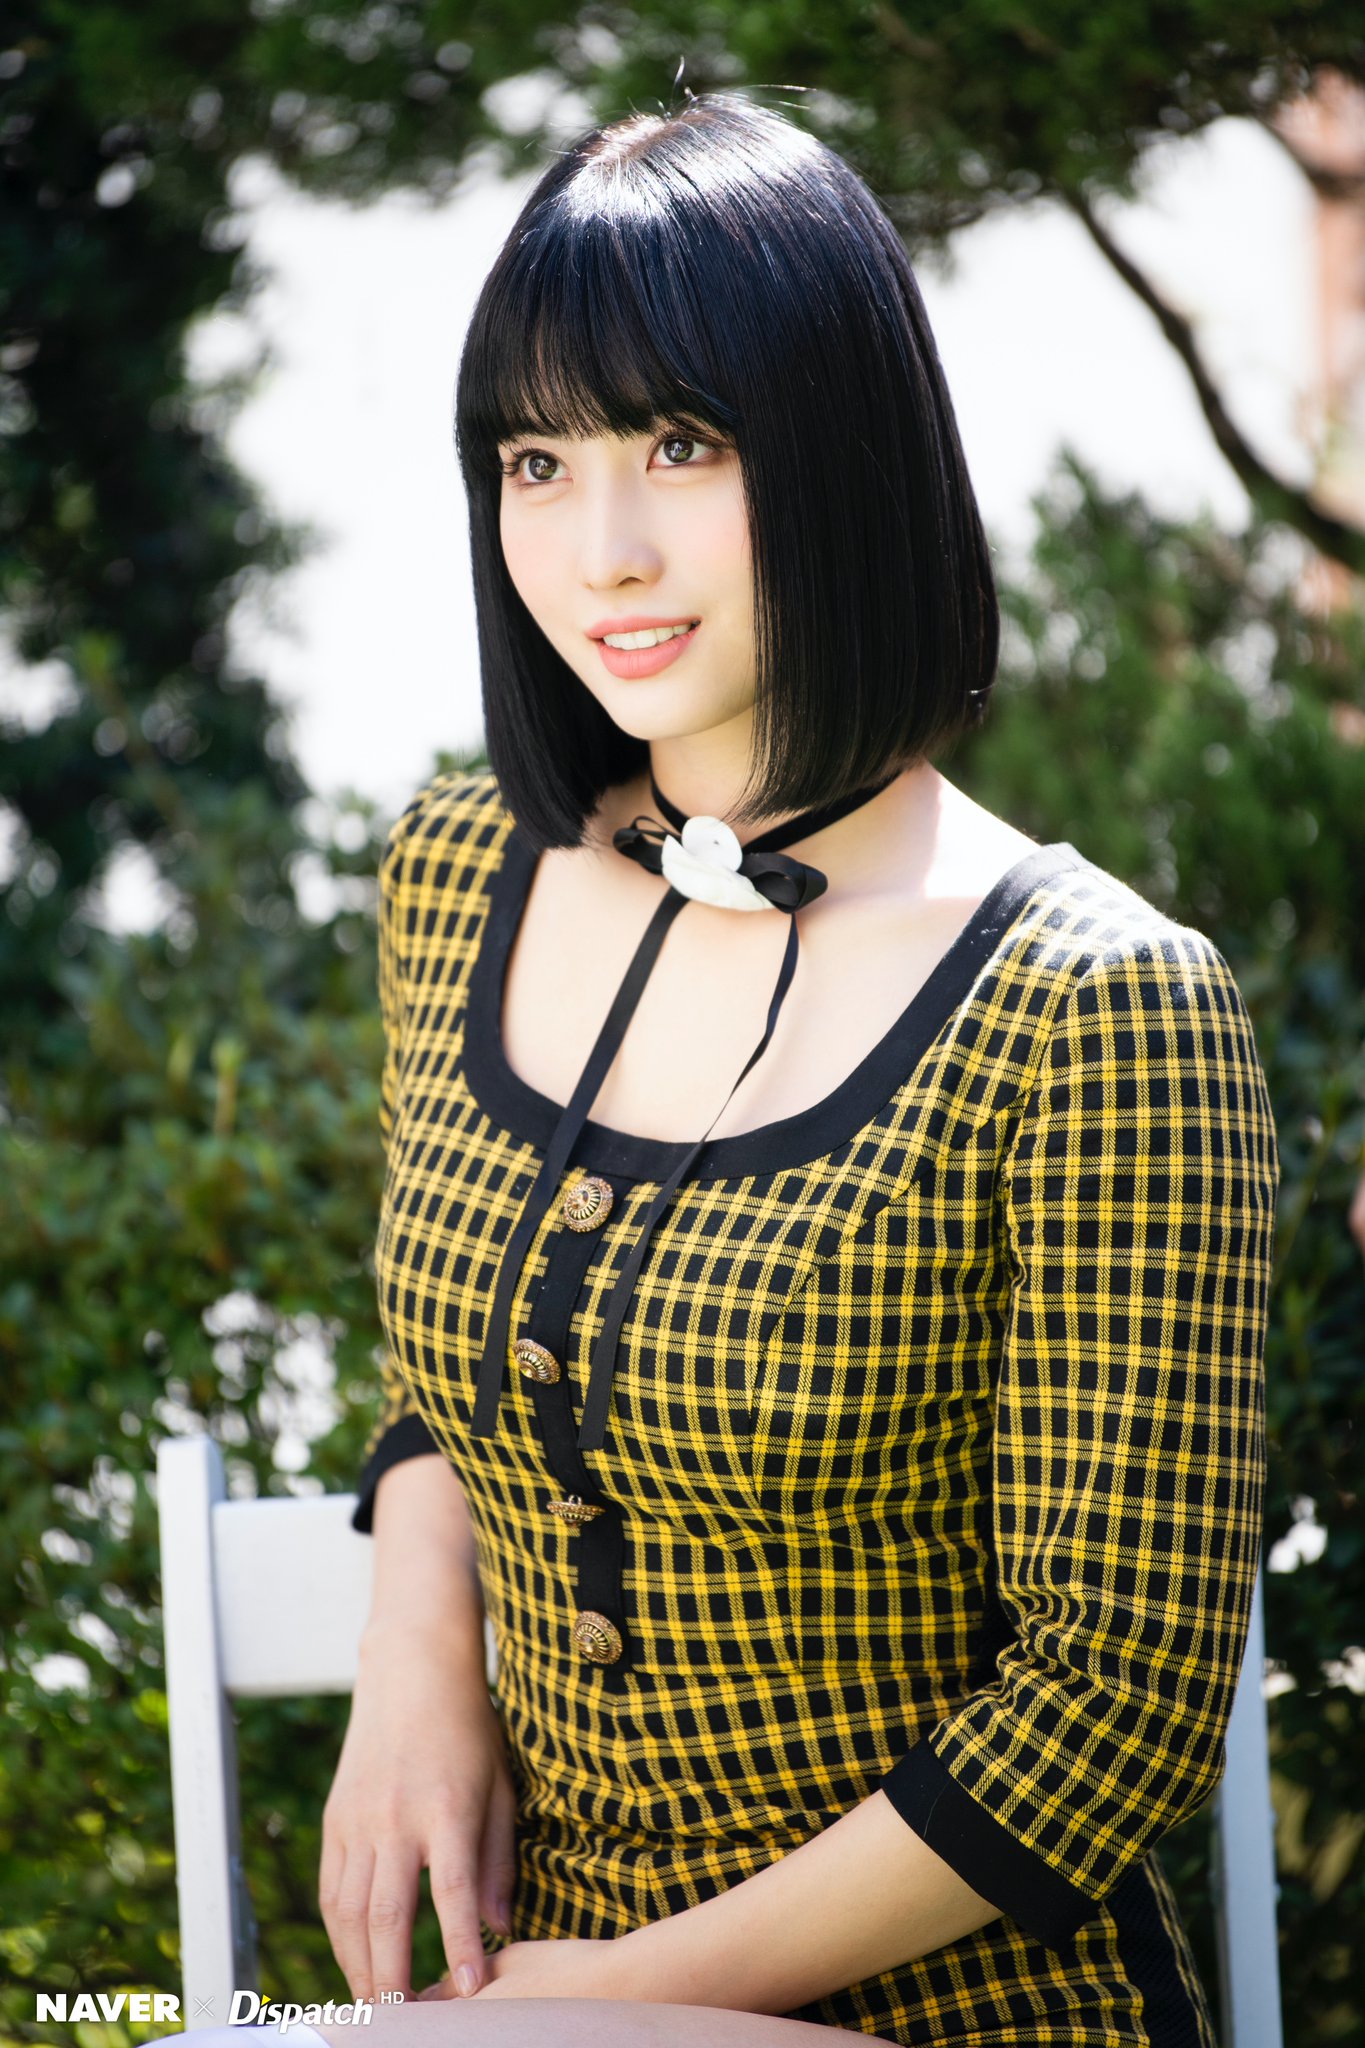 Misa ᴗ Twice X Naver Dispatch Momo S Hd Photos For Eyes Wide Open Jypetwice